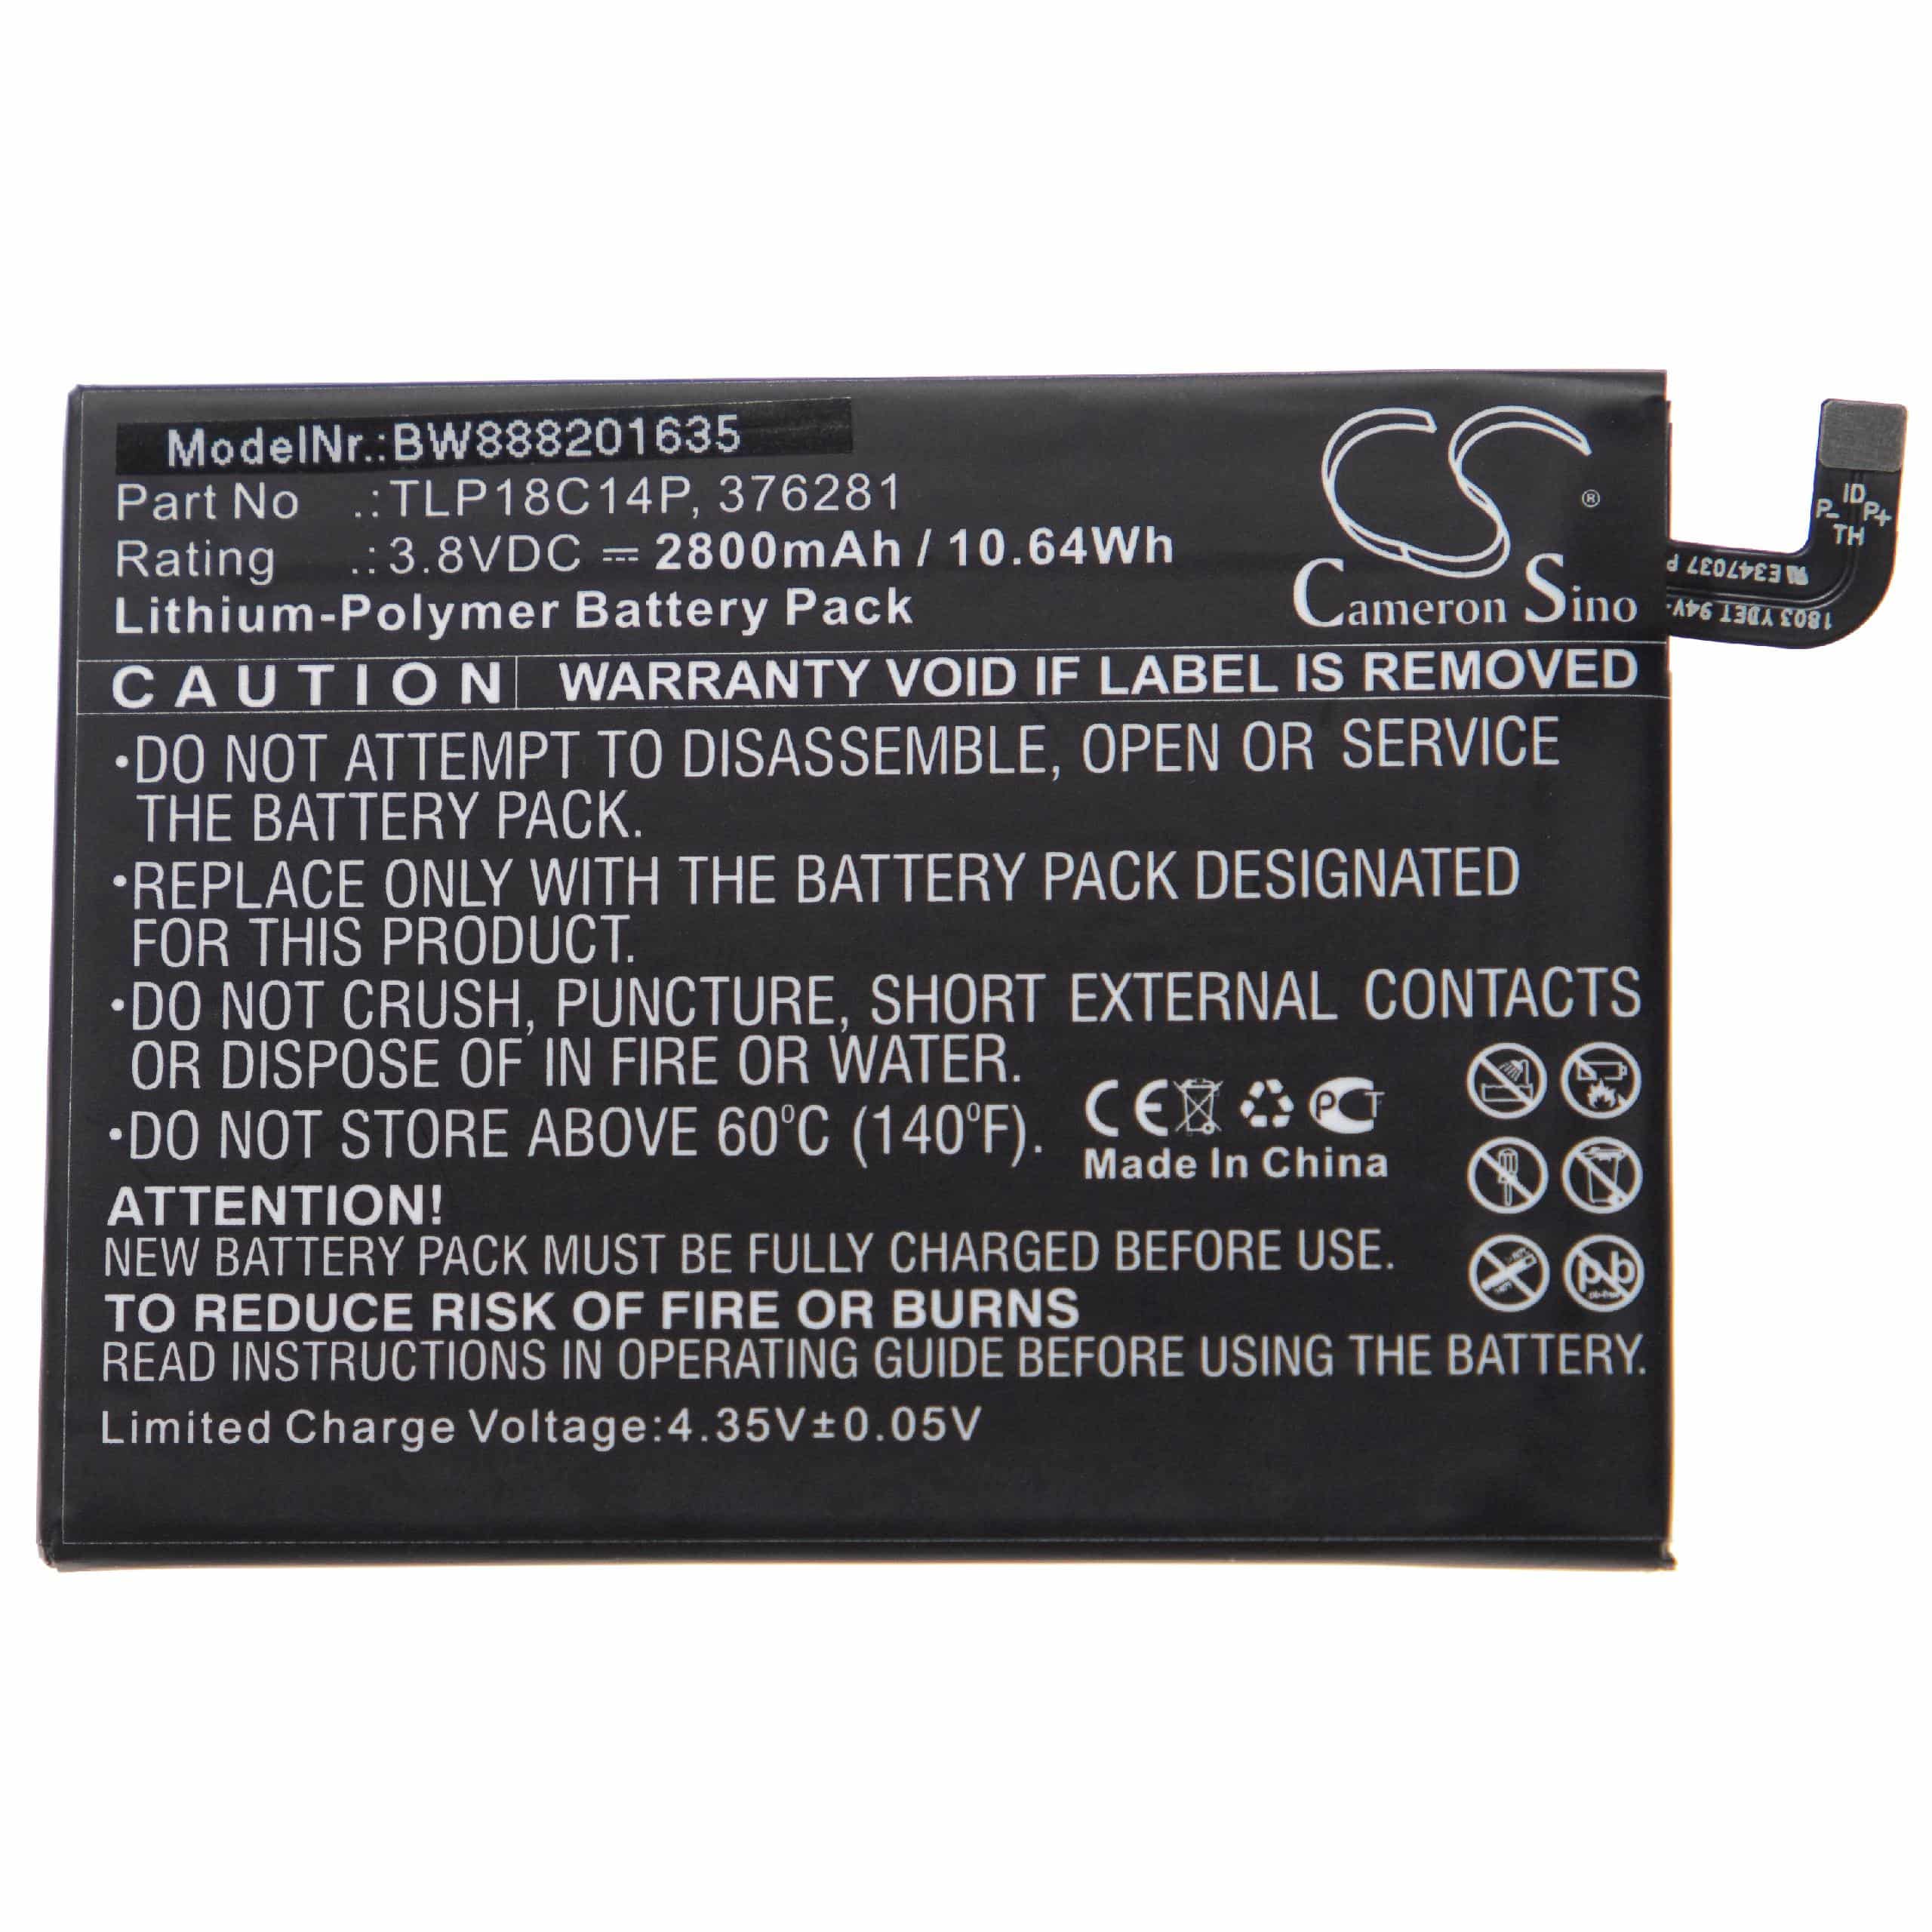 Mobile Phone Battery Replacement for Wiko 376281, TLP18C14P - 2800mAh 3.8V Li-polymer